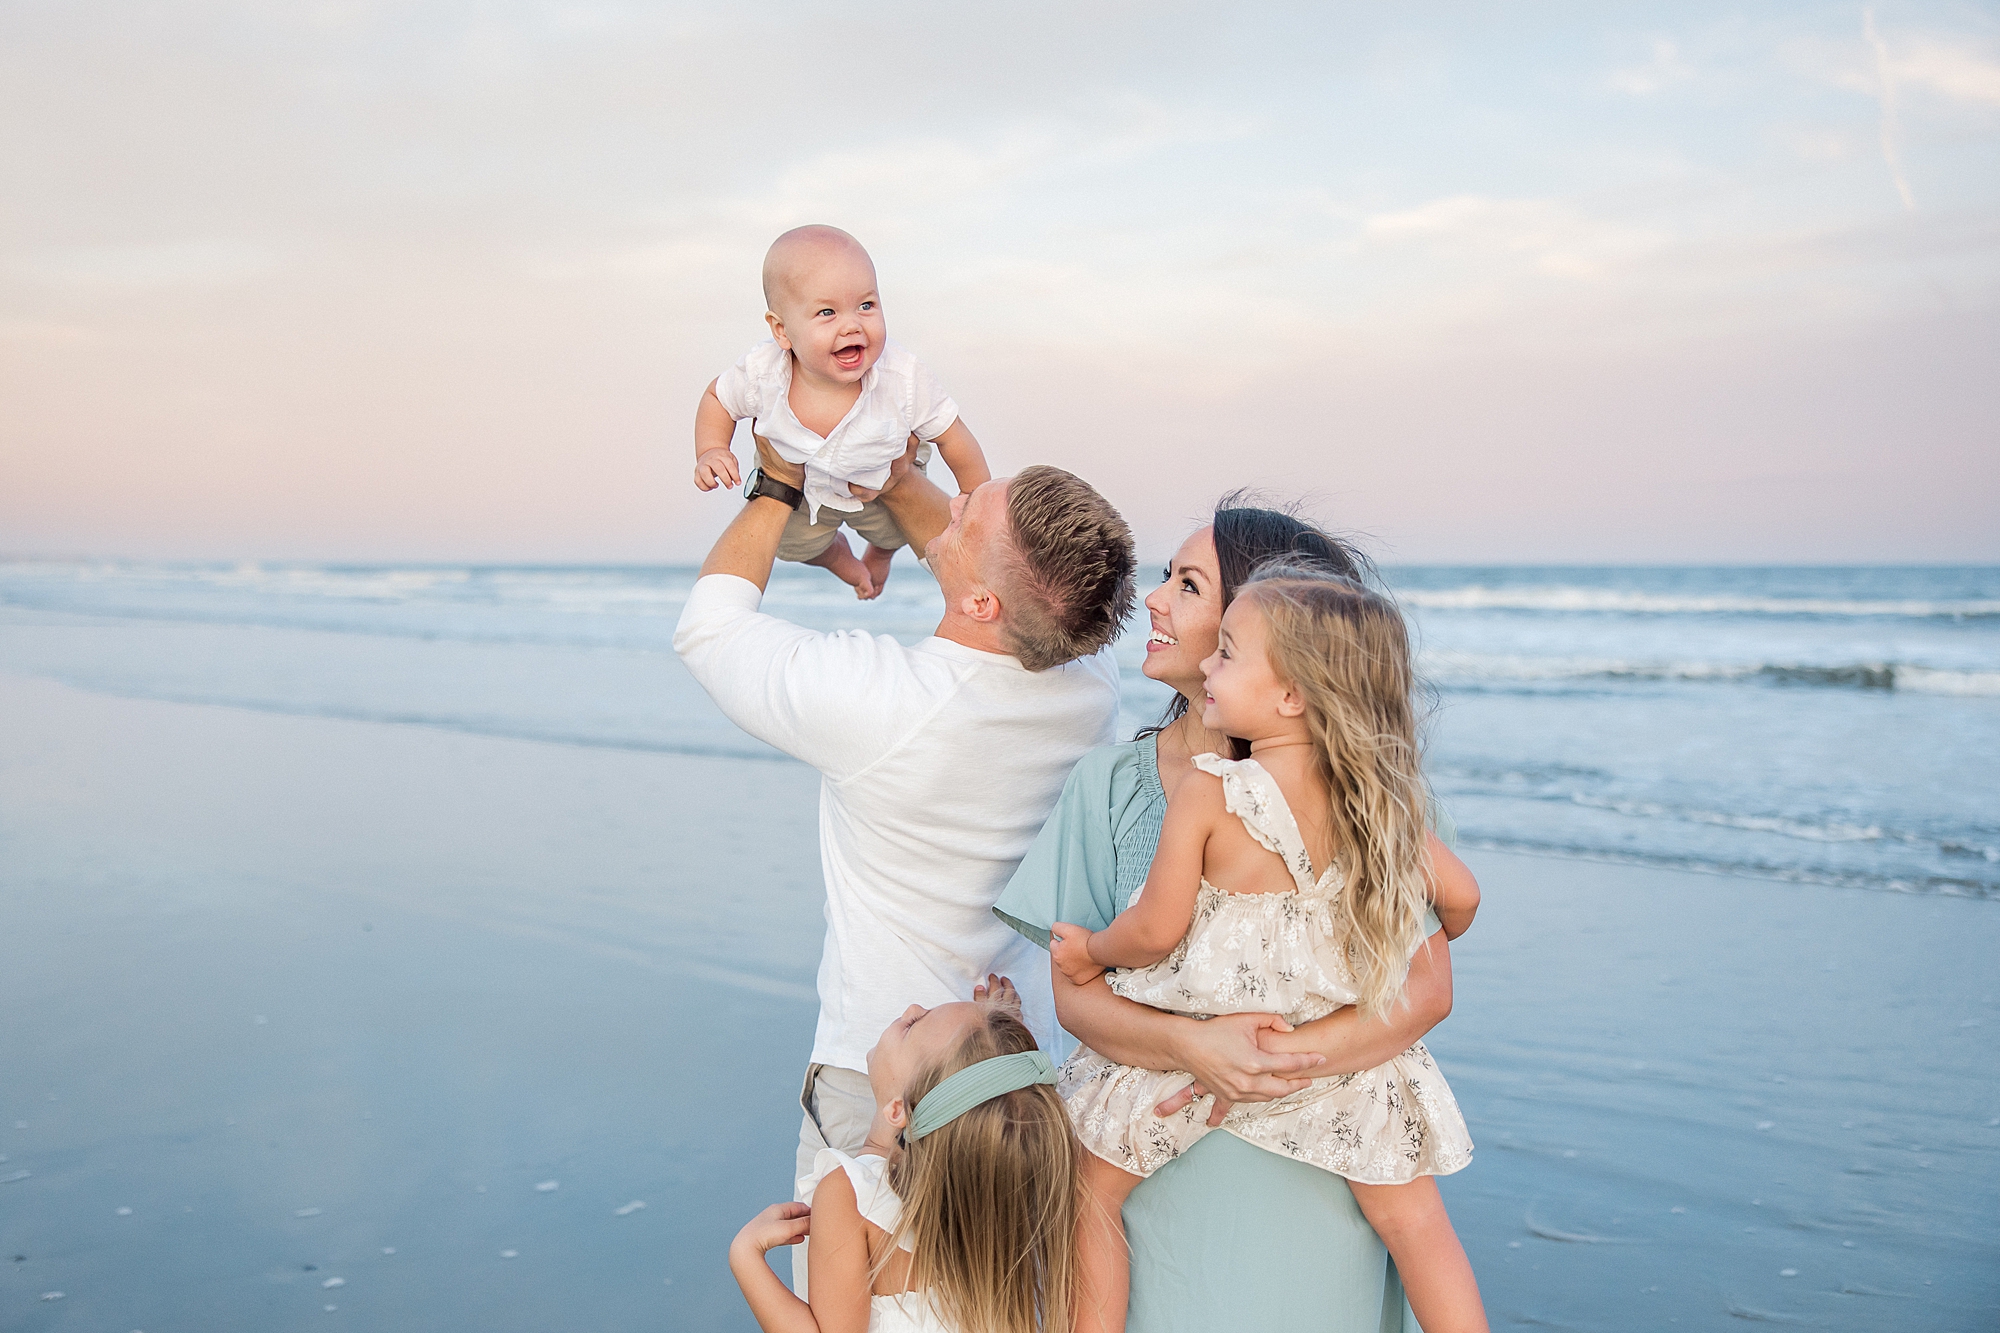 dad holds up son in the air as everyone looks up at him